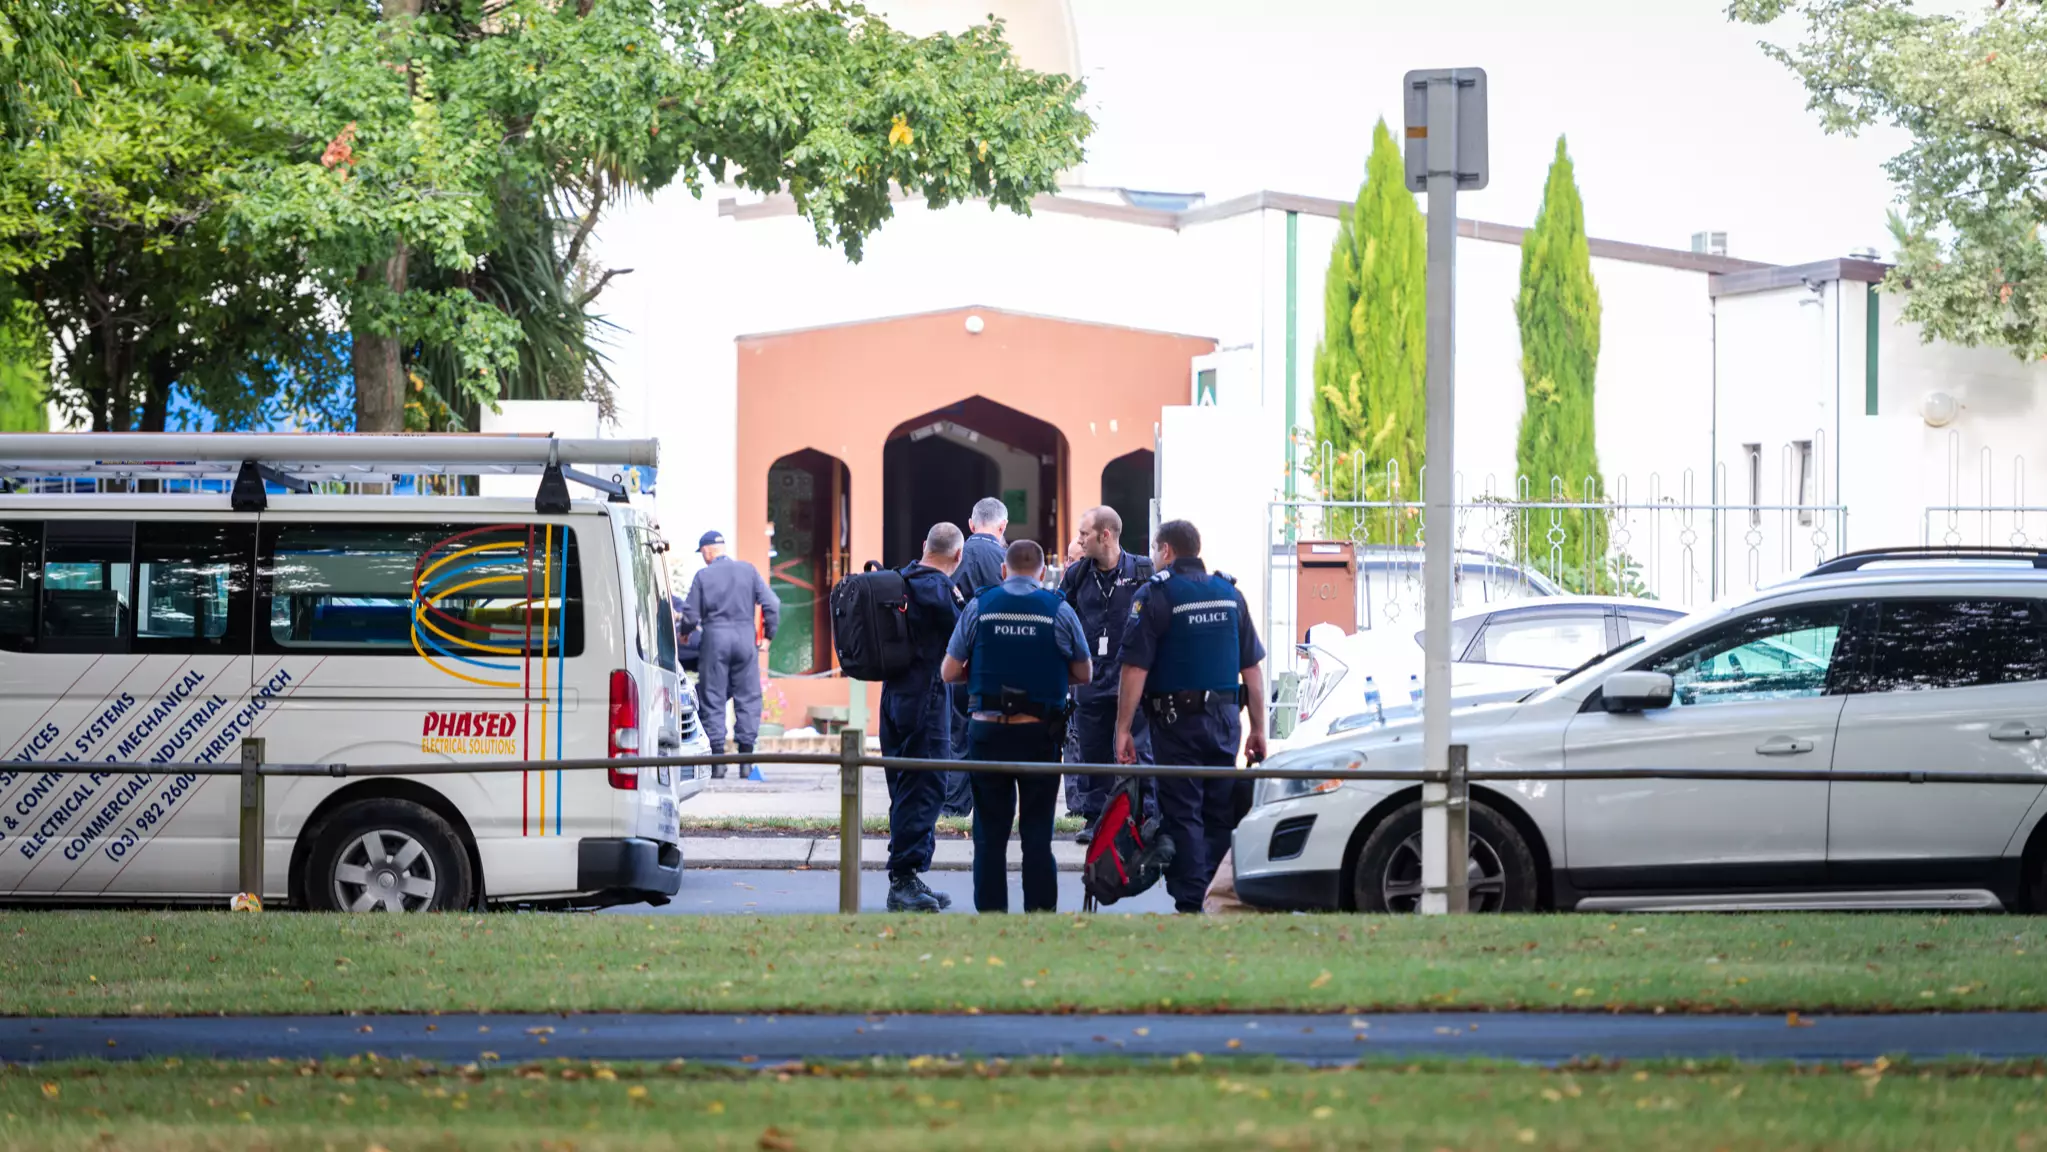 New Zealand Pledges To Change Gun Laws In Light Of Mosque Attacks